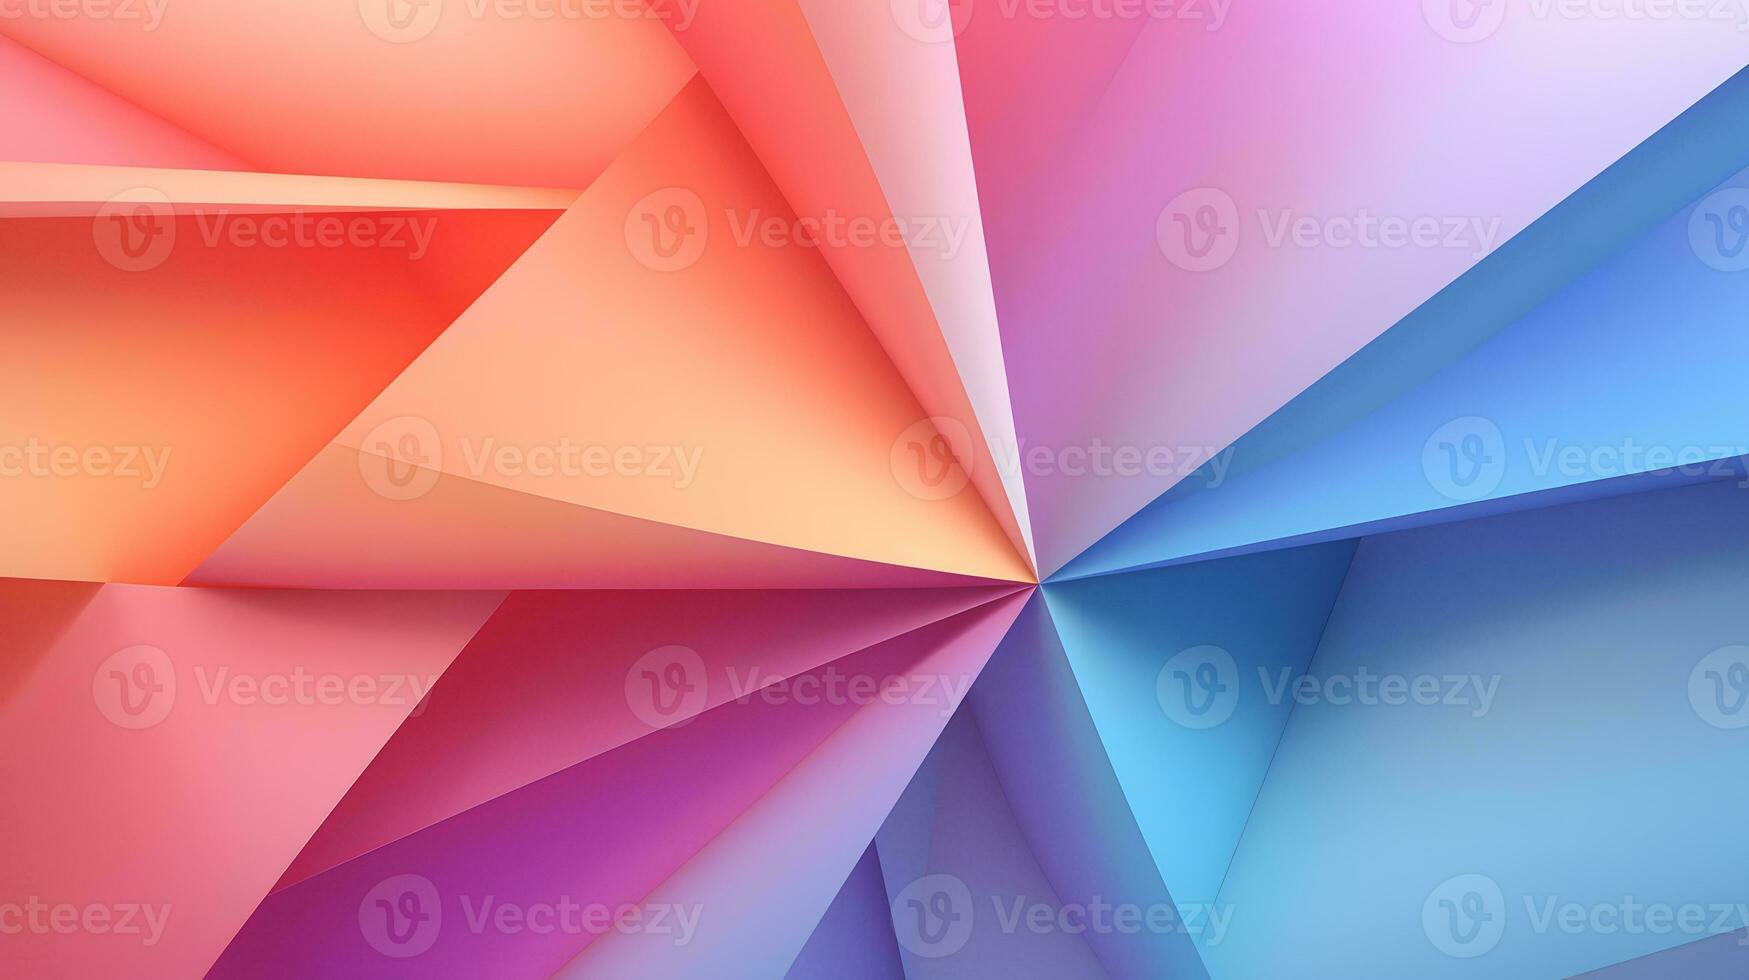 colorful abstract geometric background photo